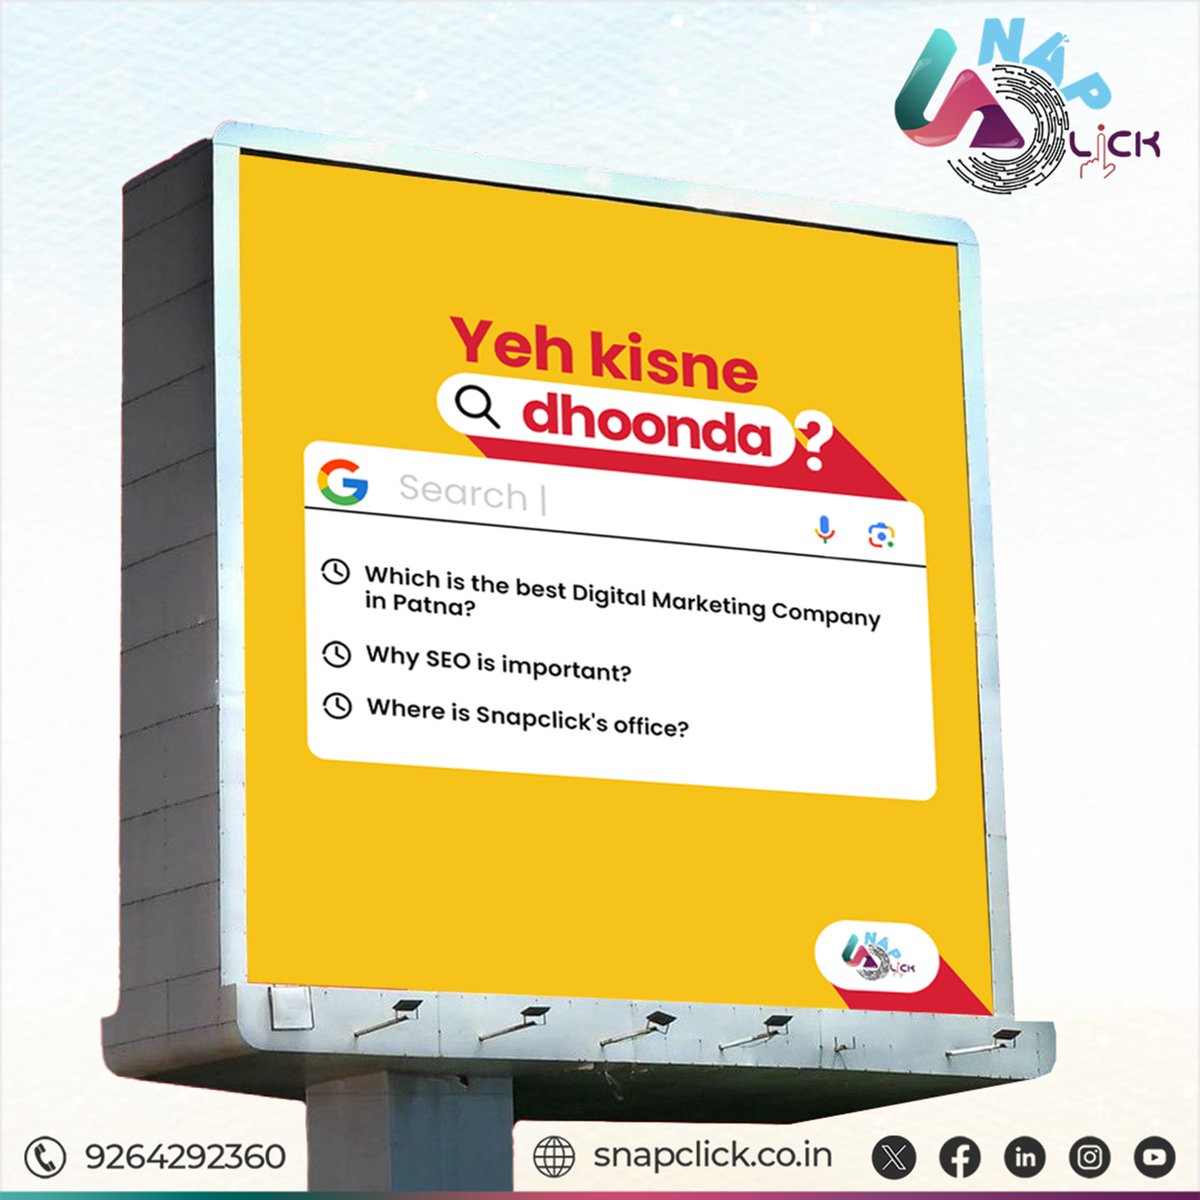 We know the answer to this question but it's your turn to tell us in the comment section.

+91 9264292360
📷snapclick.co.in

#YehKisneDhoonda #momentmarketing #trending #trendingposts #digitalmarketing #onlinemarketing #seo  #BestDigitalMarketingAgency #snapclick